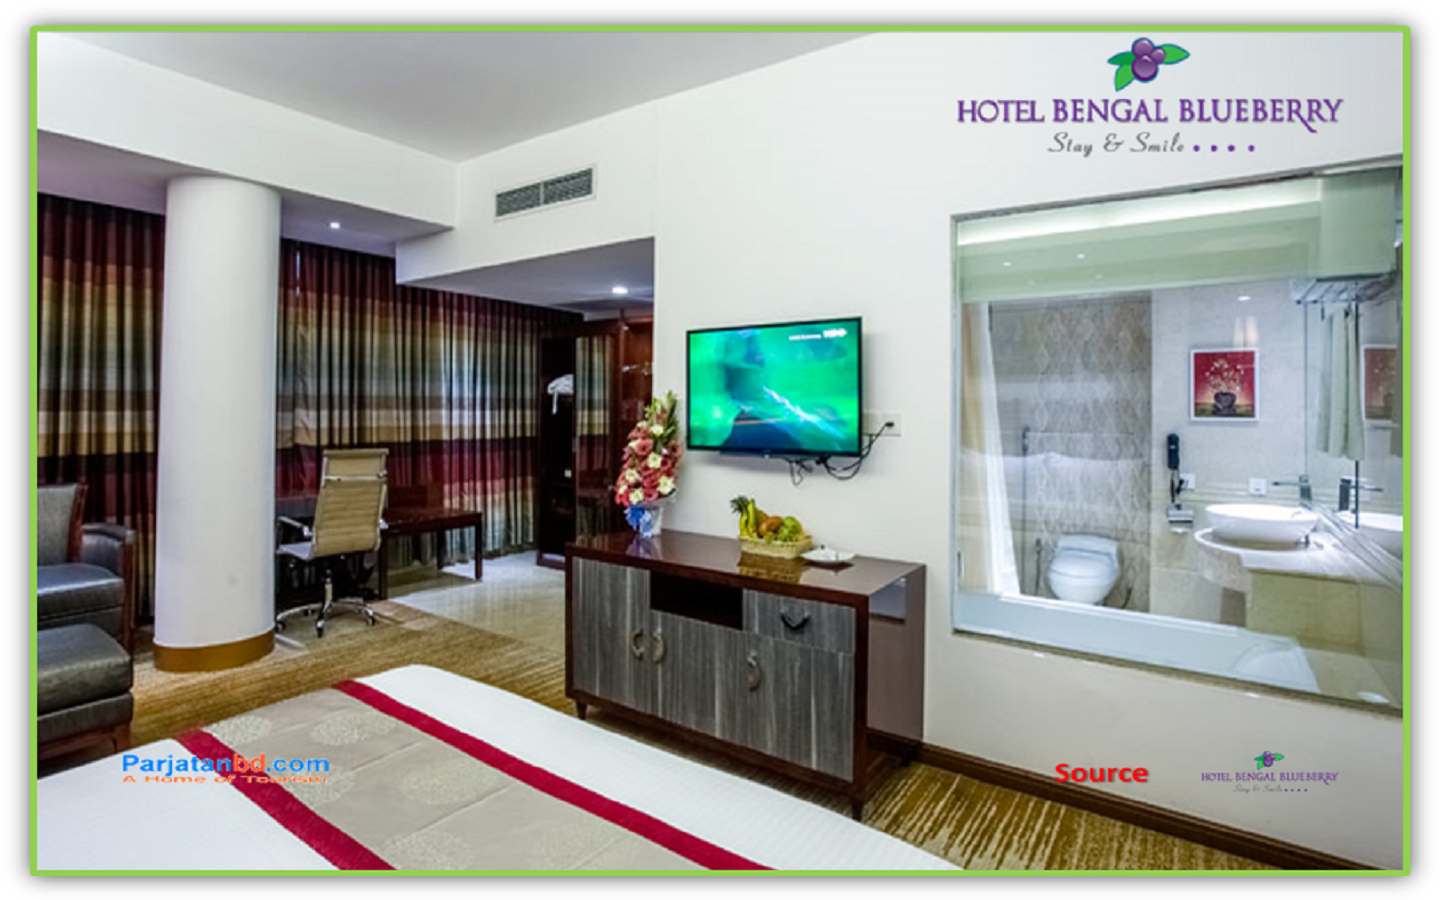 Room Royal Suite  -1, Hotel Bengal Blueberry, Gulshan 2